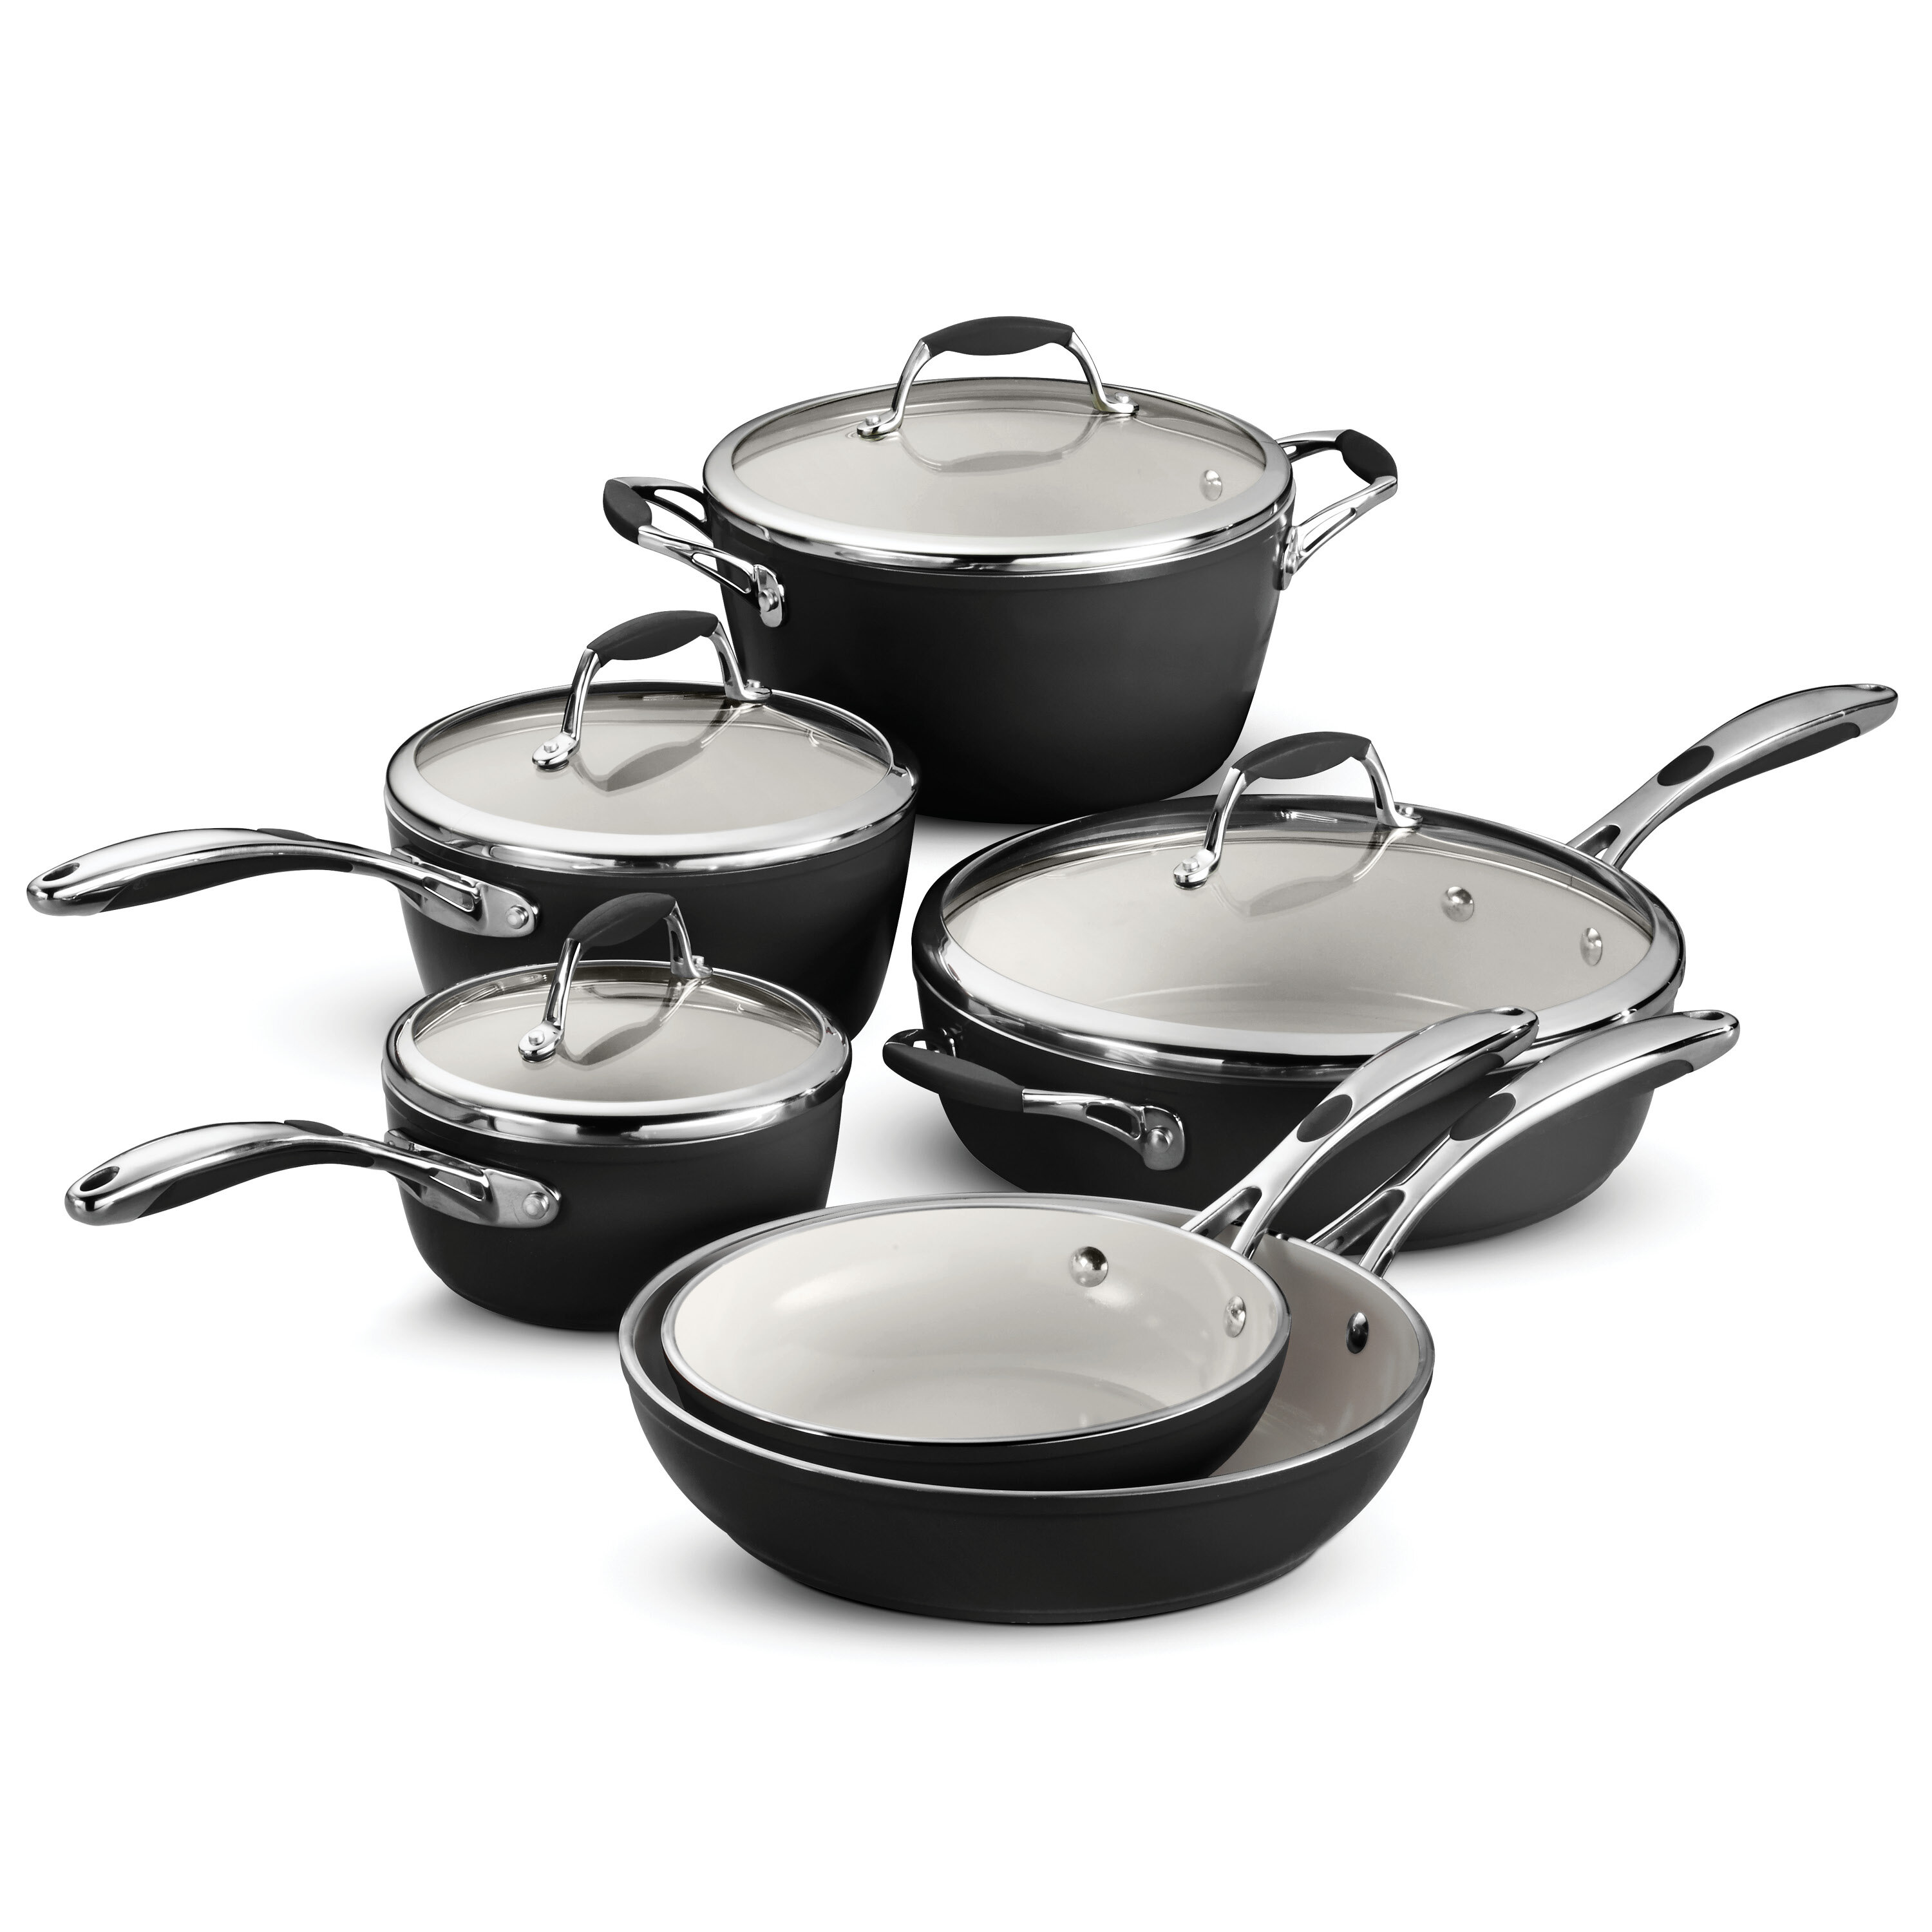 Redchef Ceramic Pots and Pans Set - 7-Piece White Nonstick Kitchen Cookware  Sets with Glass Lid - Non-Stick Frying Pans